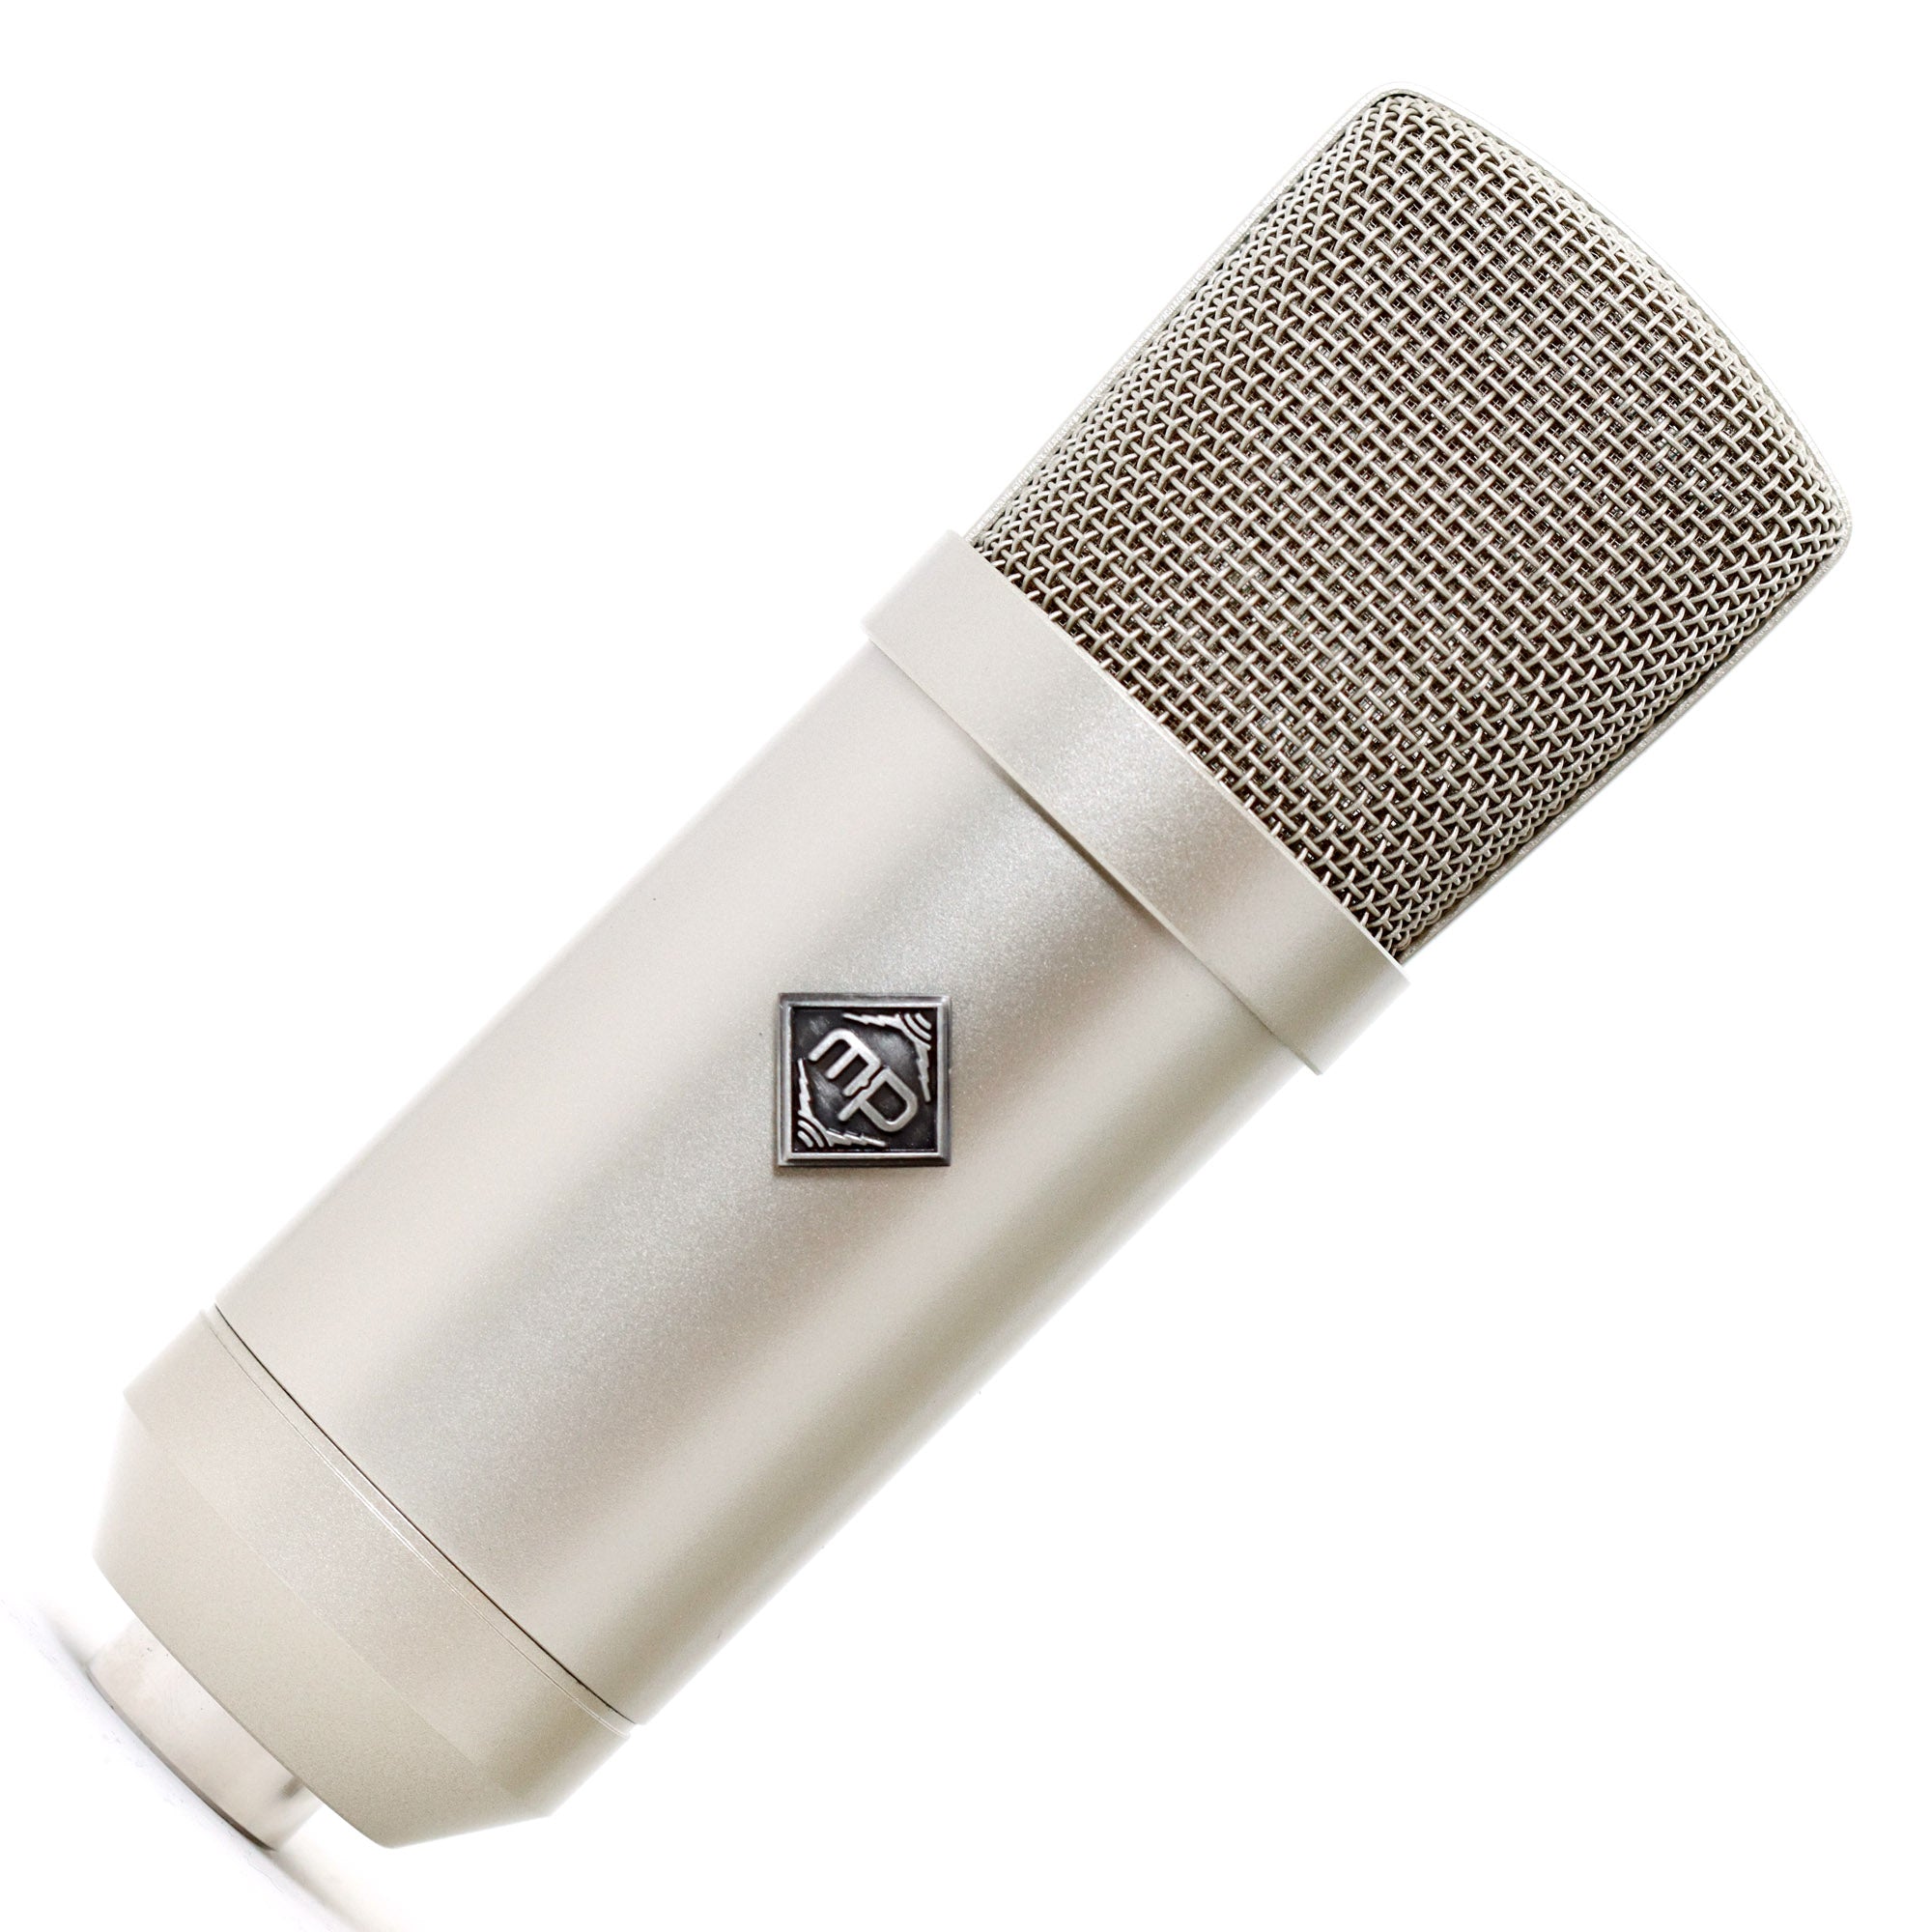 Which microphone for a guitar recording? - Mic & Mod